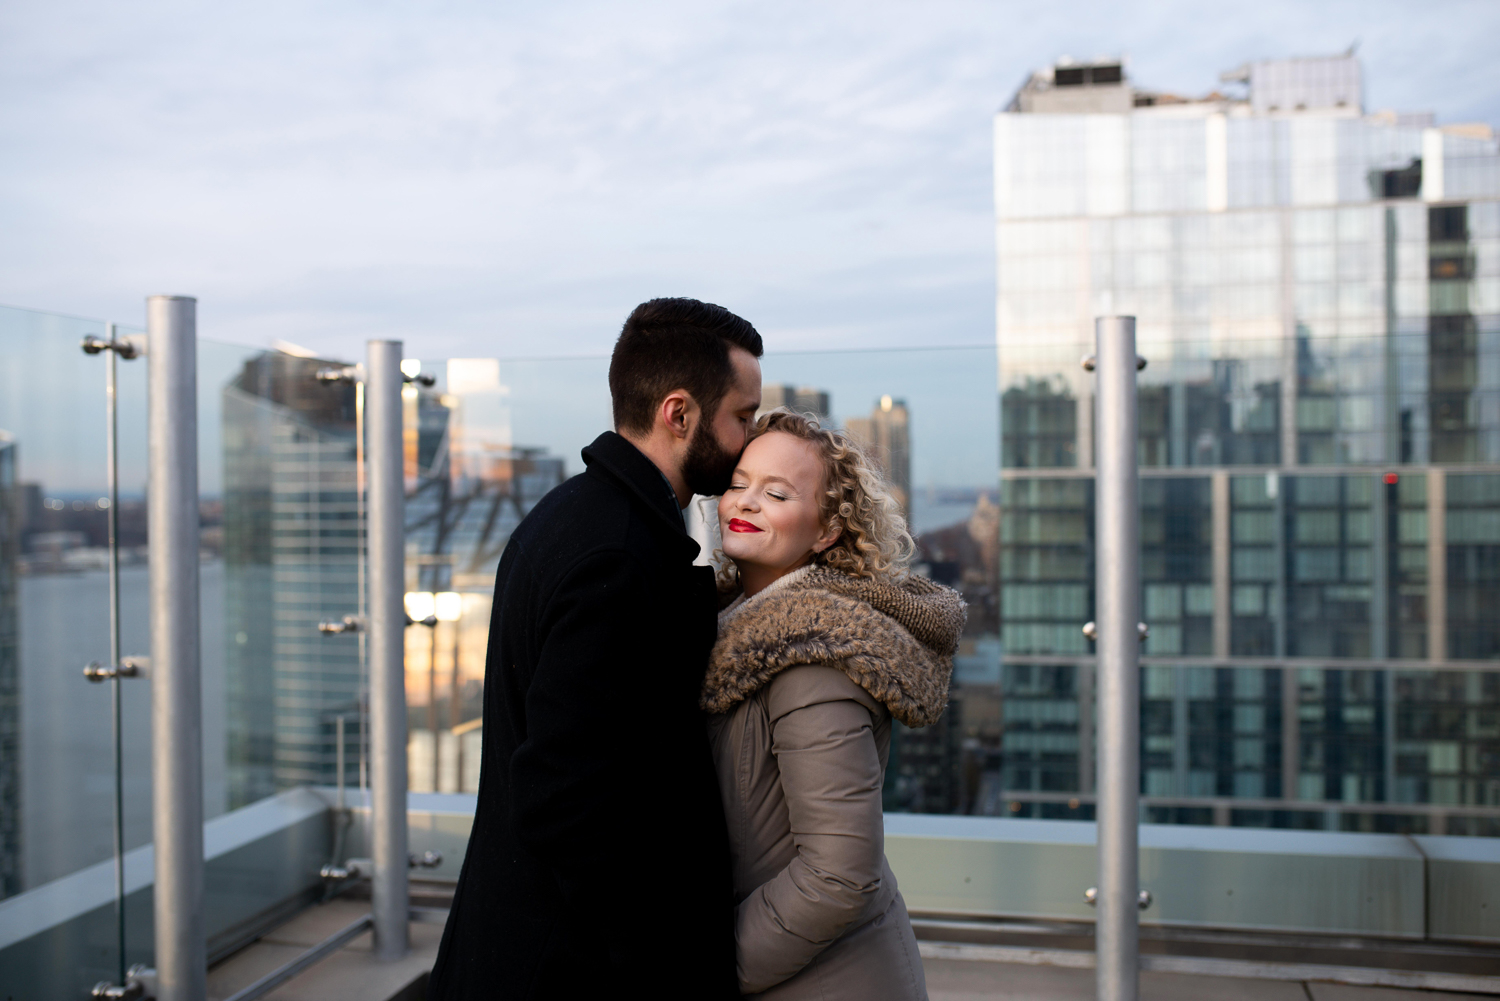 Amanda Jane Cooper, recently seen as Glinda in Wicked, gets engaged in New York City. Photo by ALN IMAGES